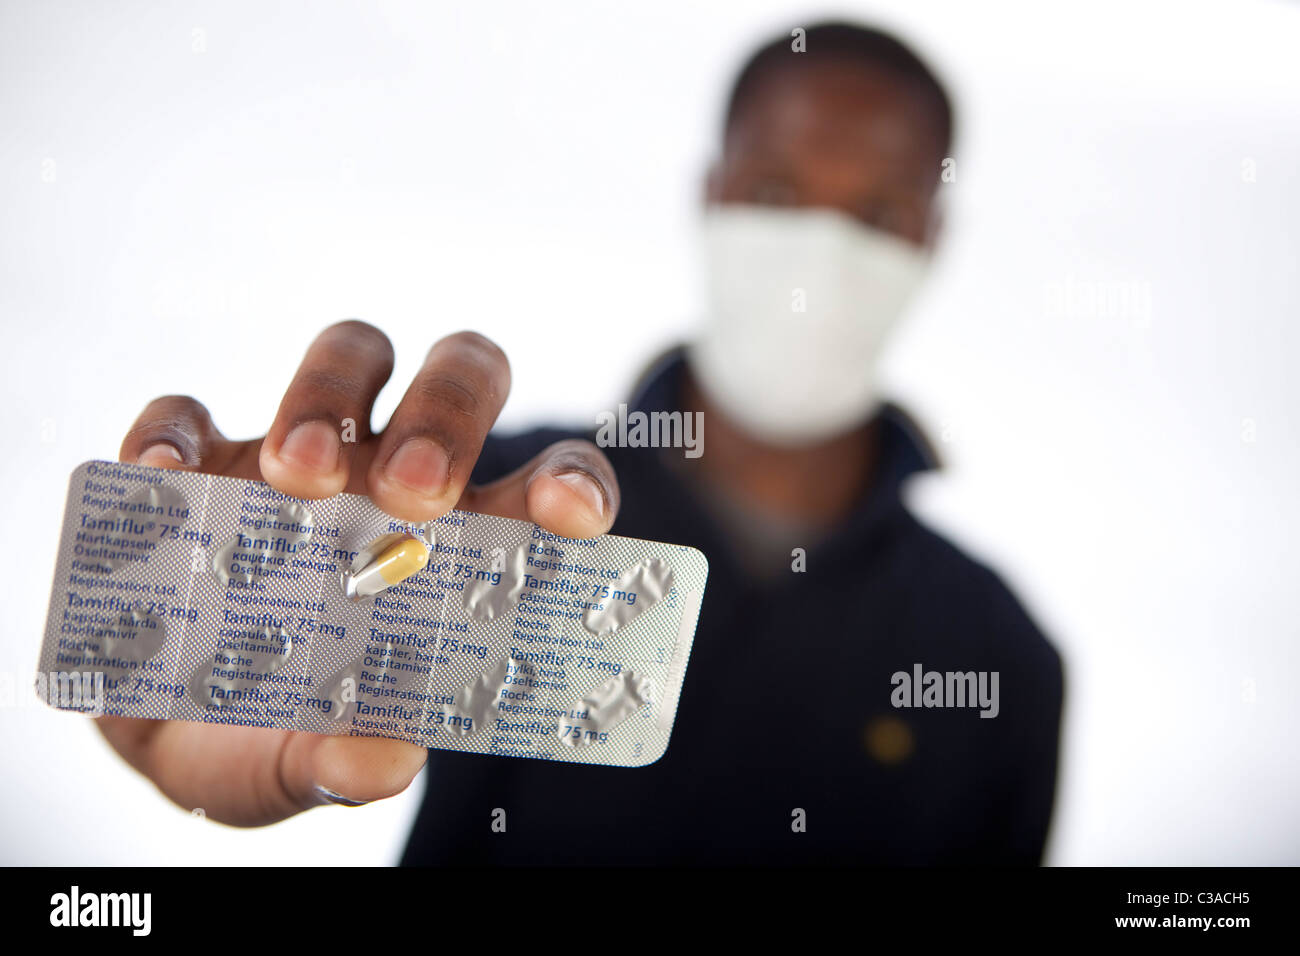 Illustrative image of a Tamiflu pack. Stock Photo